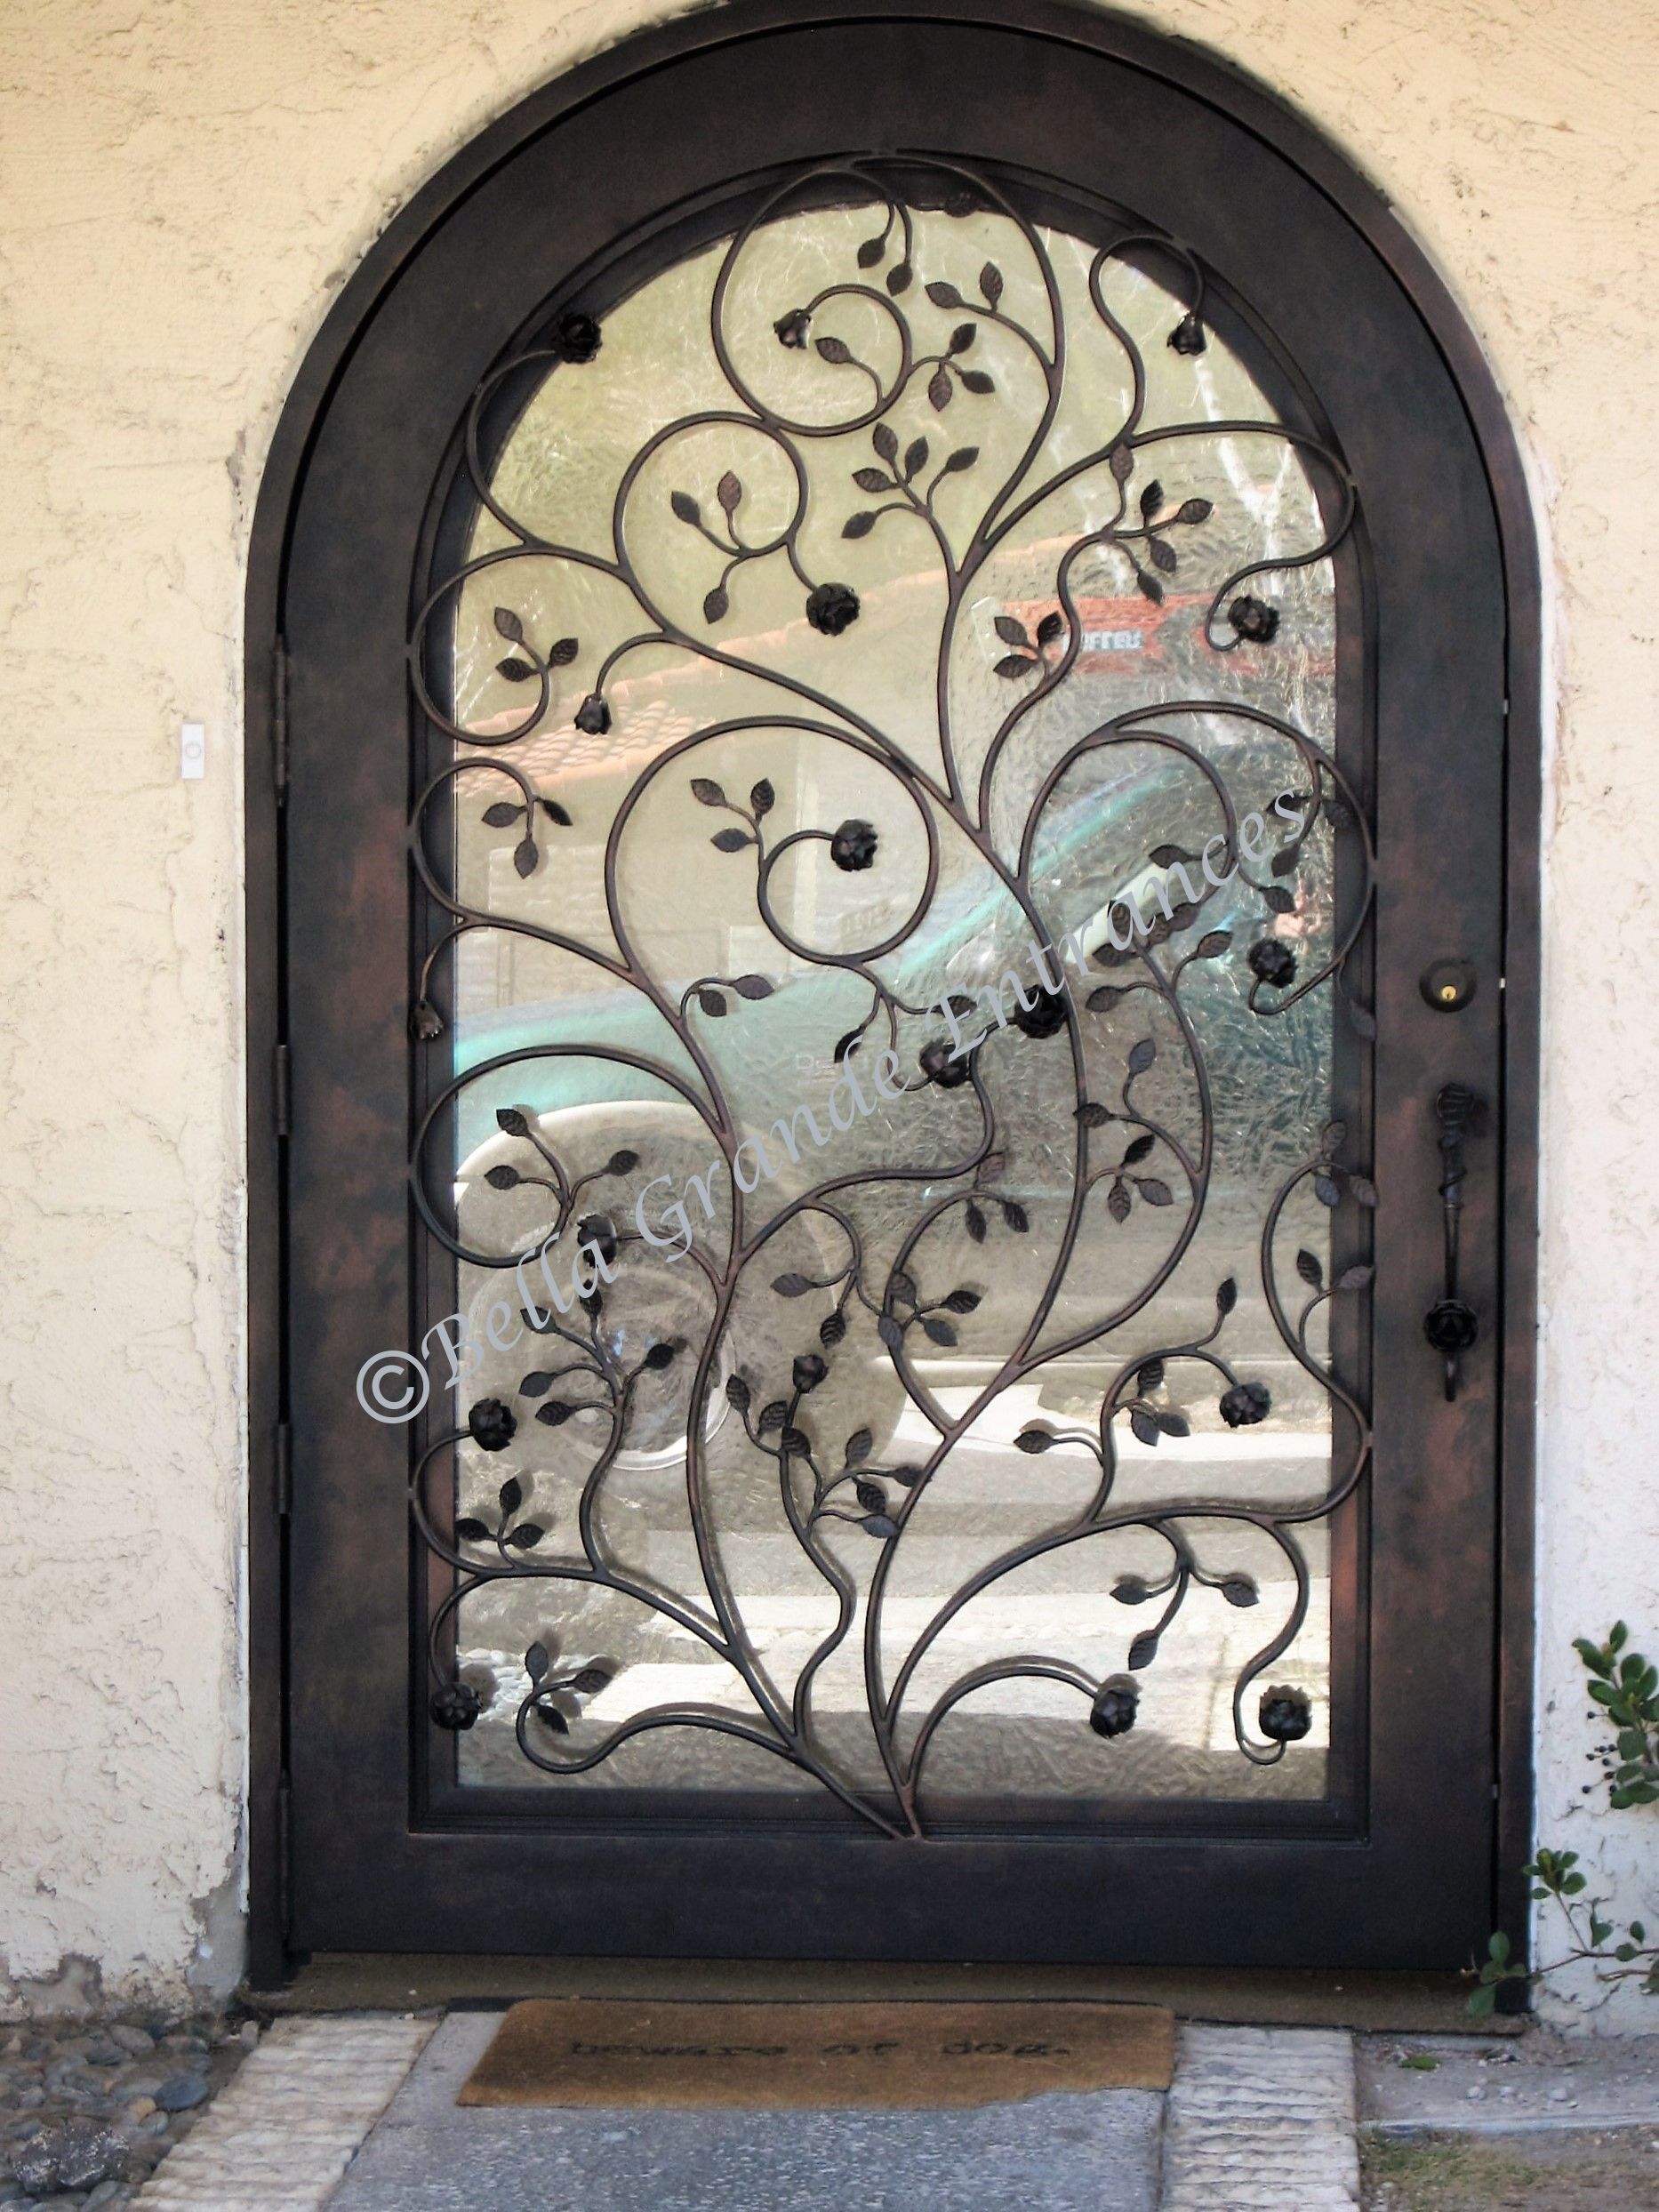 An ornamental iron door with a leaf motif and glass is elegantly positioned in front of a residence in Las Vegas.